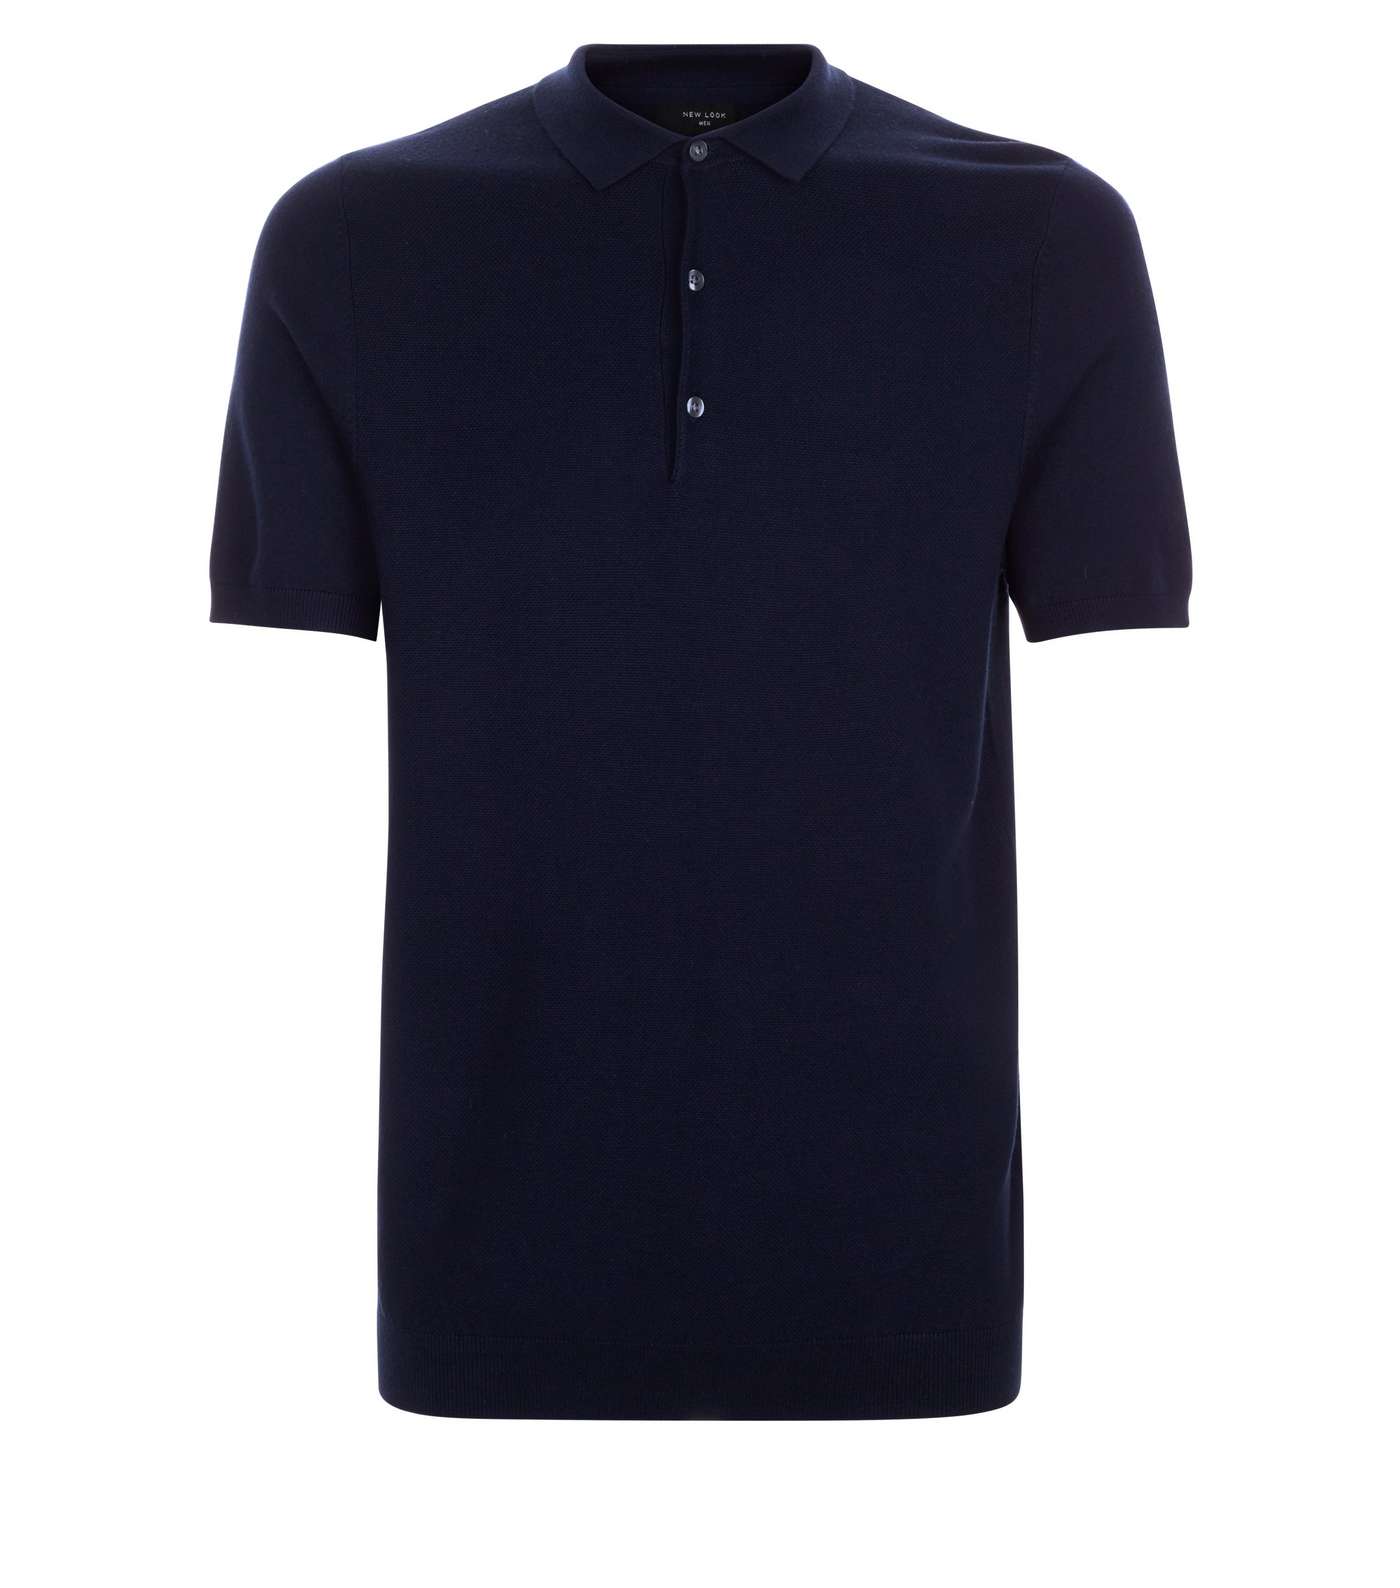 Navy Knitted Slim Fit Polo Shirt Image 4